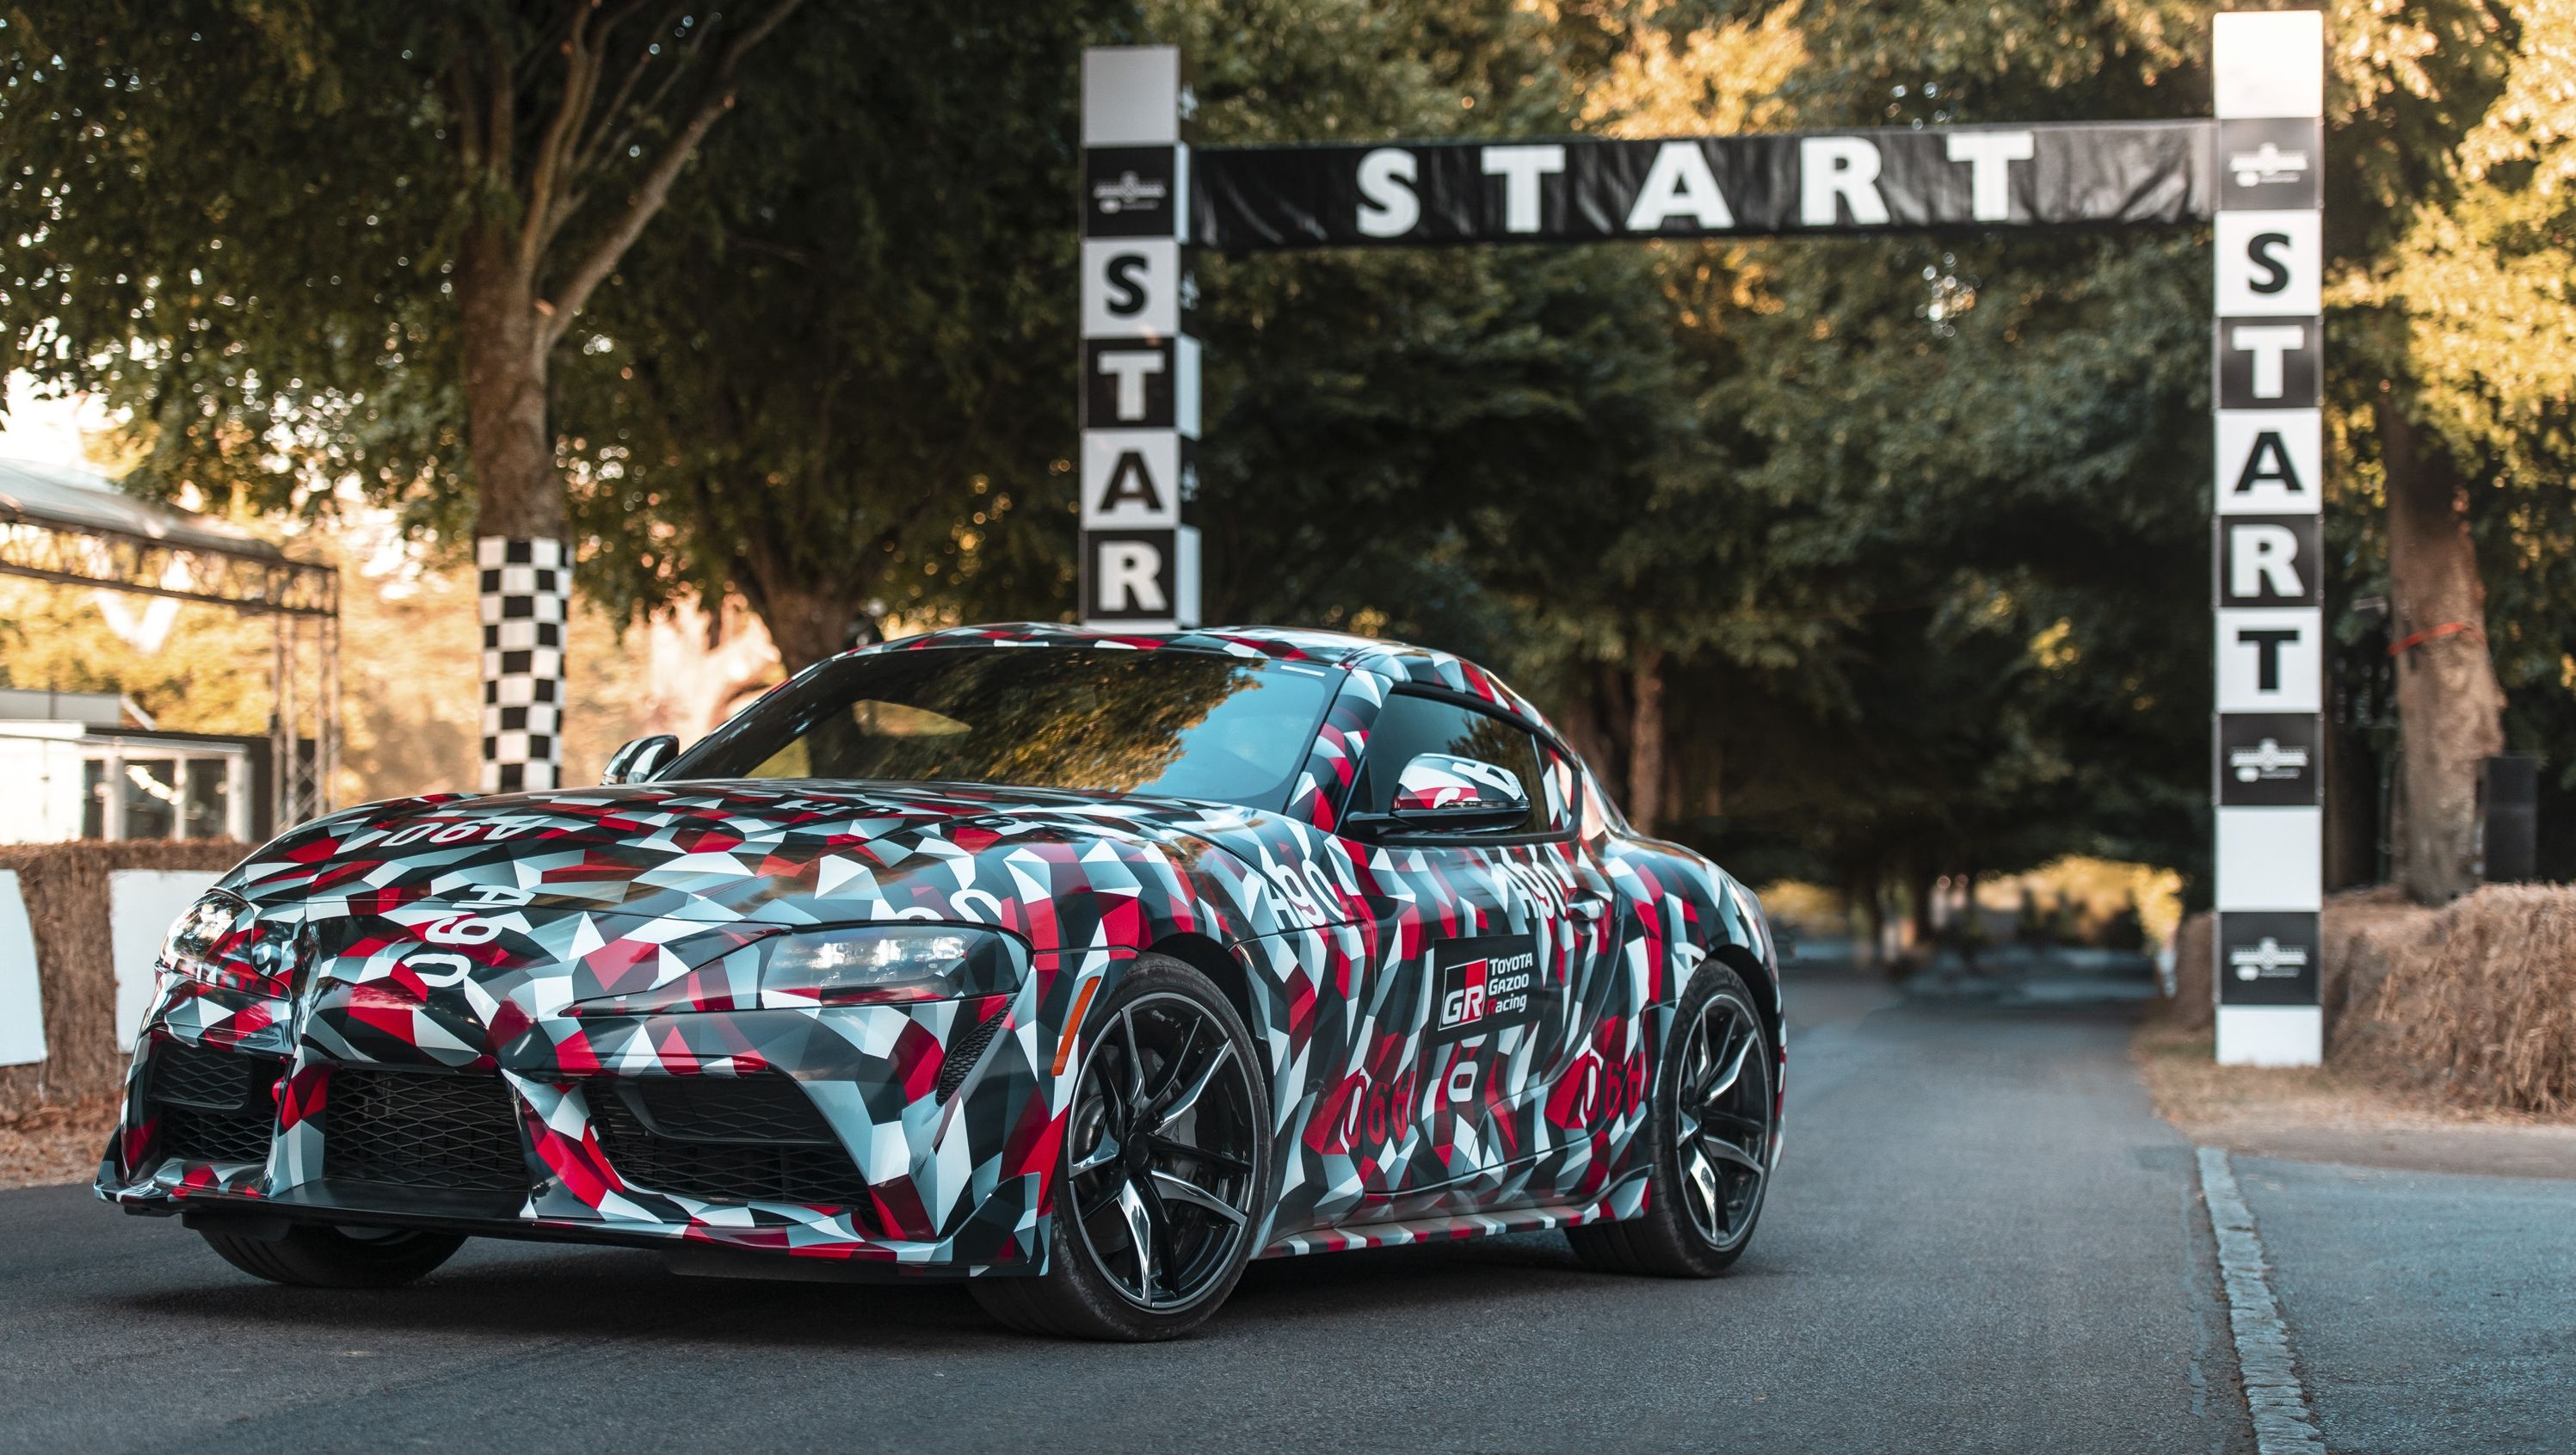 2018 - 2019 The 2020 Toyota Supra Could Go Topless After All